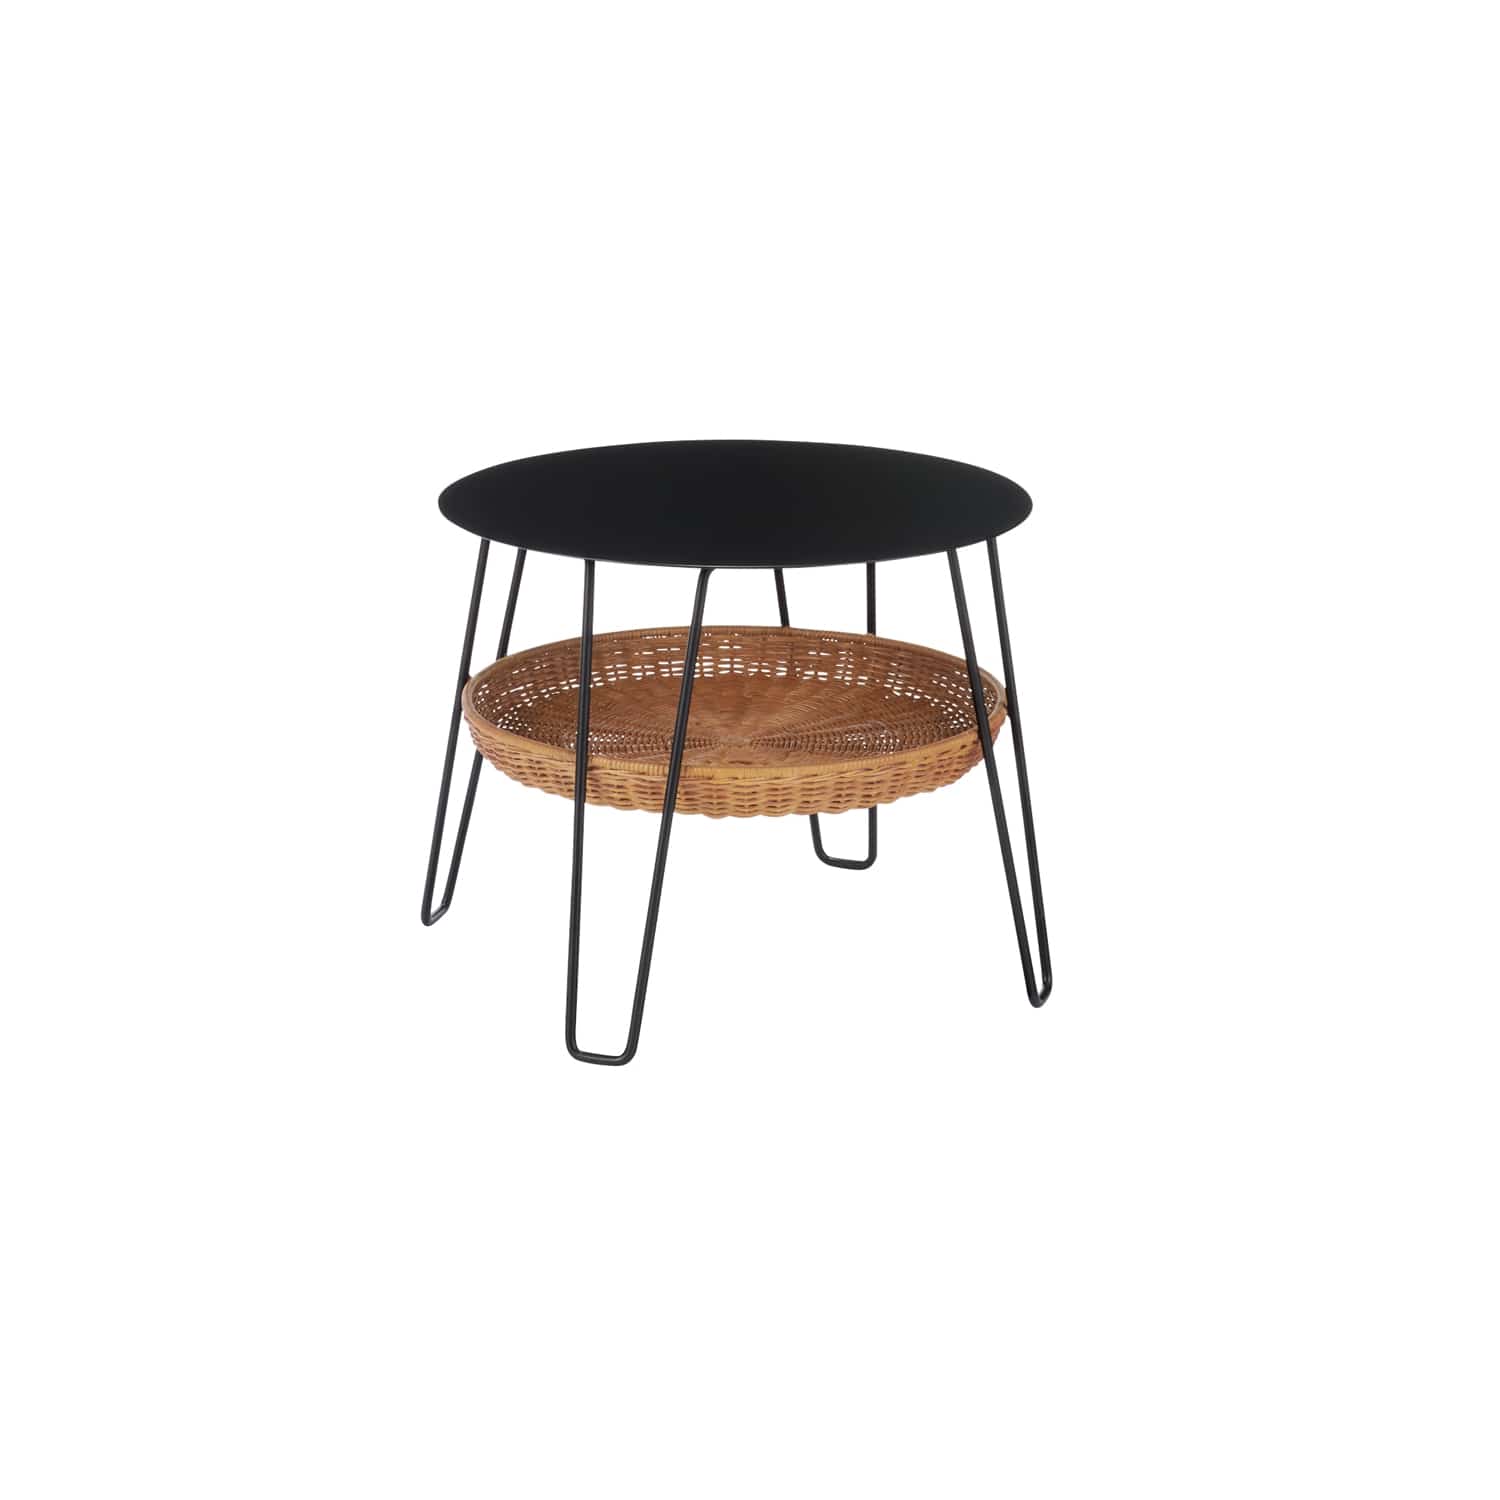 WALLABY LOW TABLE ROUND Black｜ローテーブル｜IDEE SHOP Online